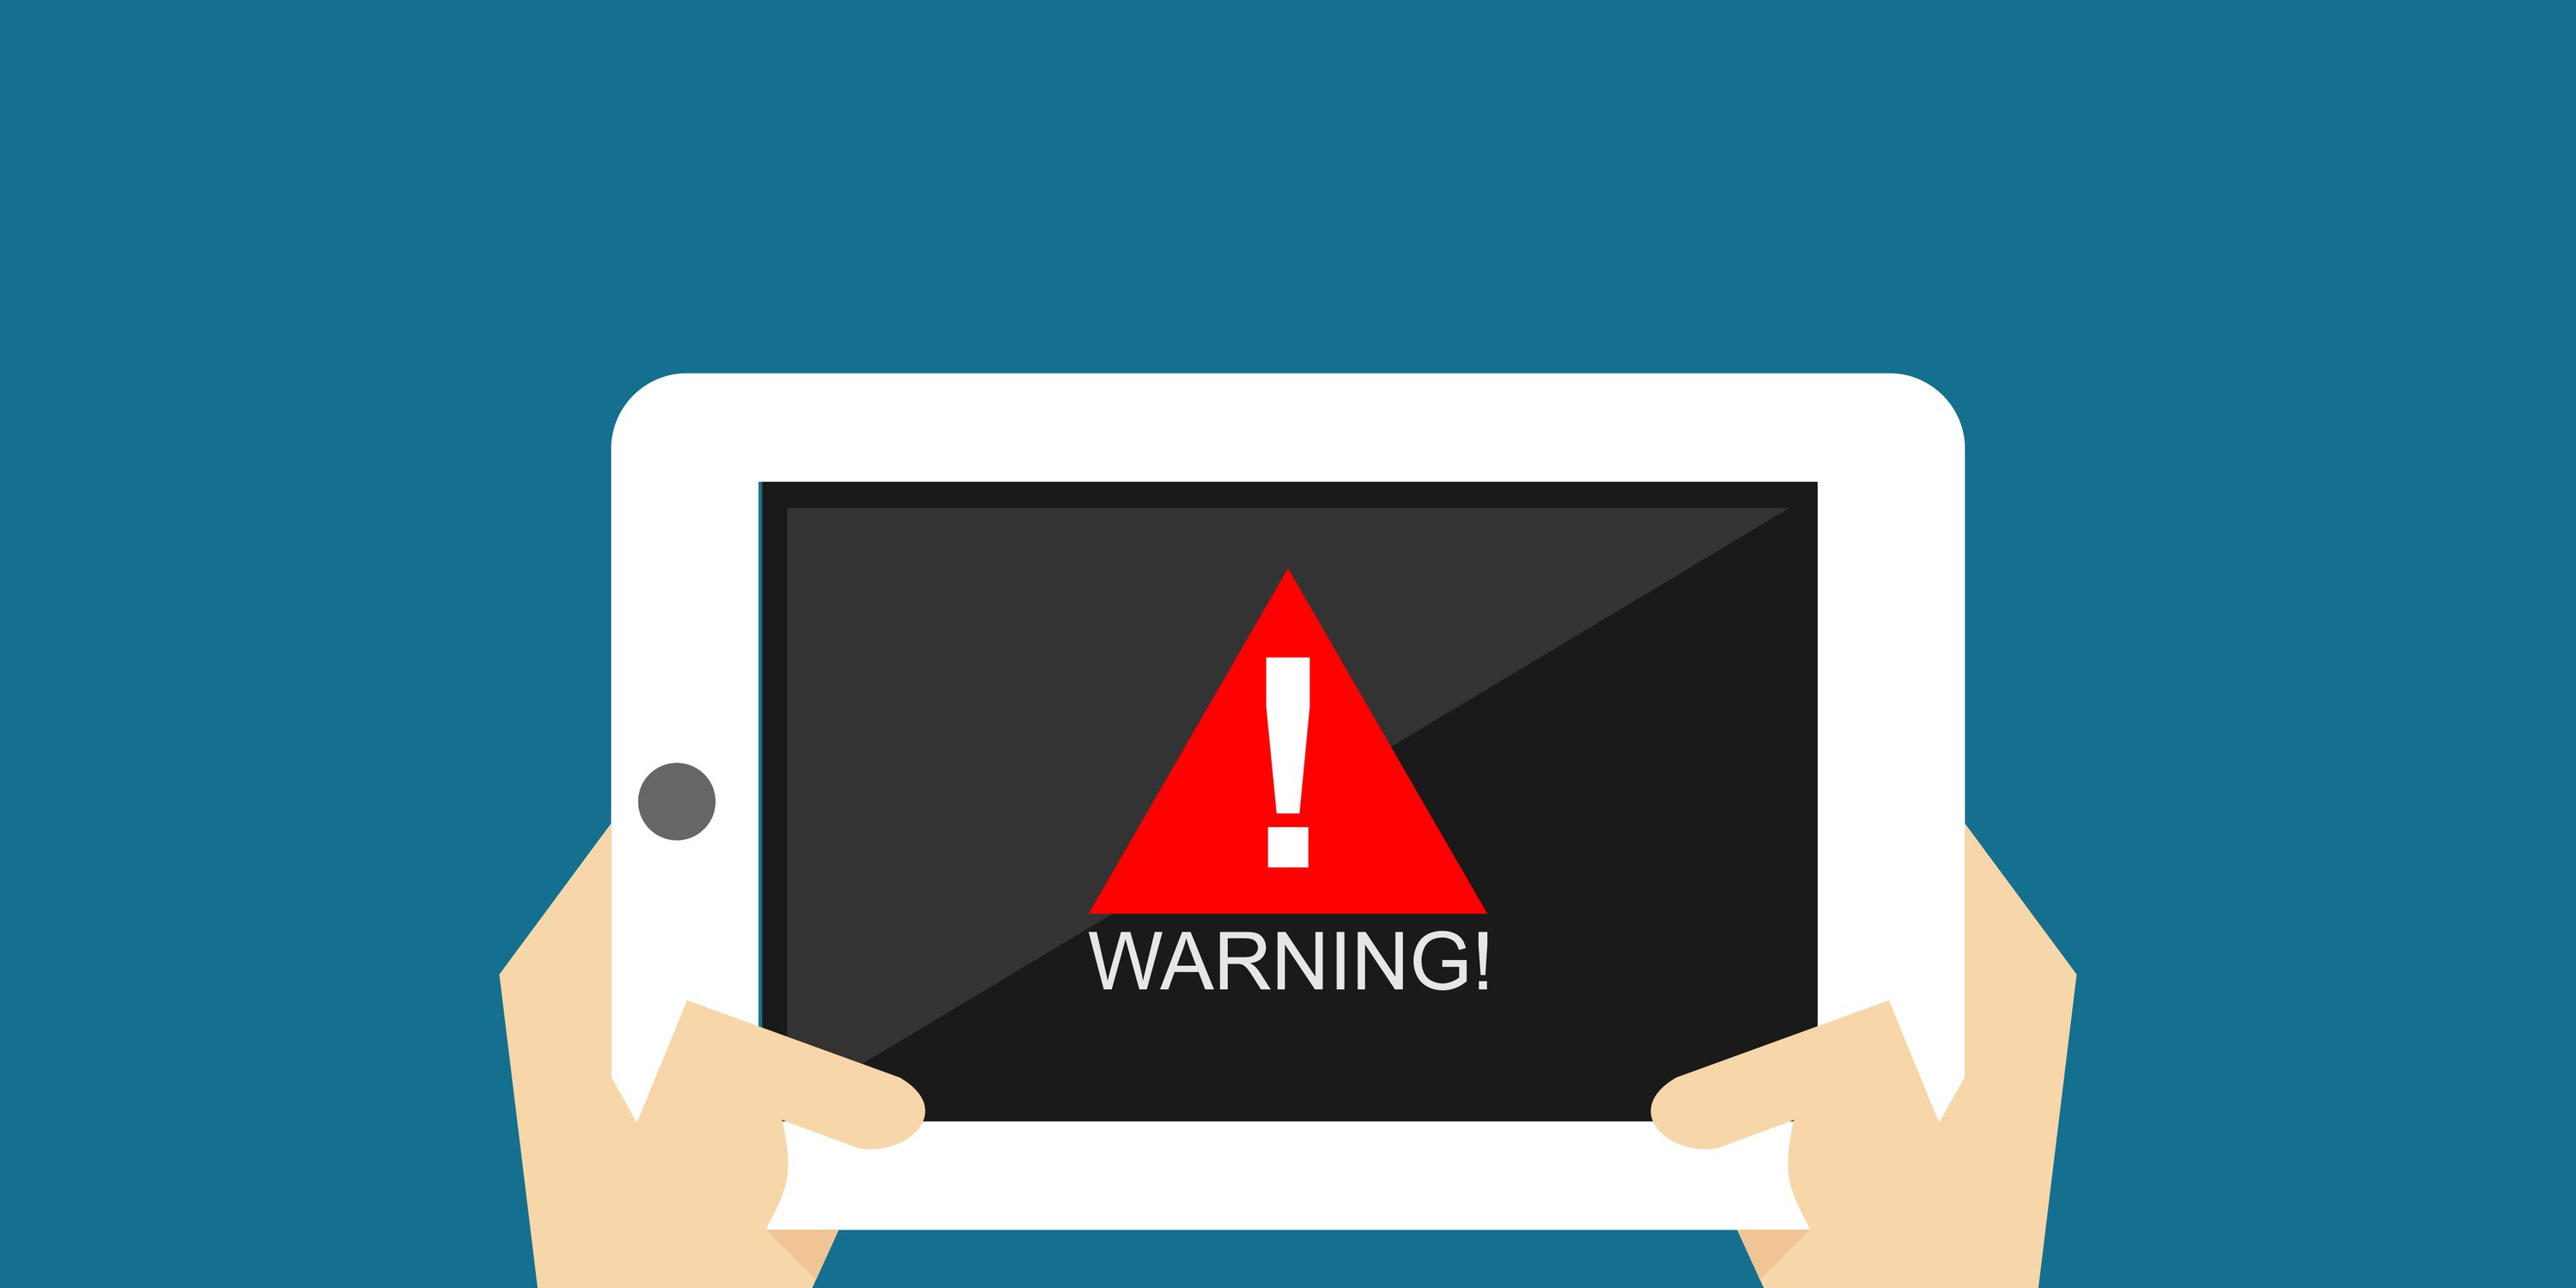 Drawing of hands holding ipad with warning sign to illustrate ultram warnings